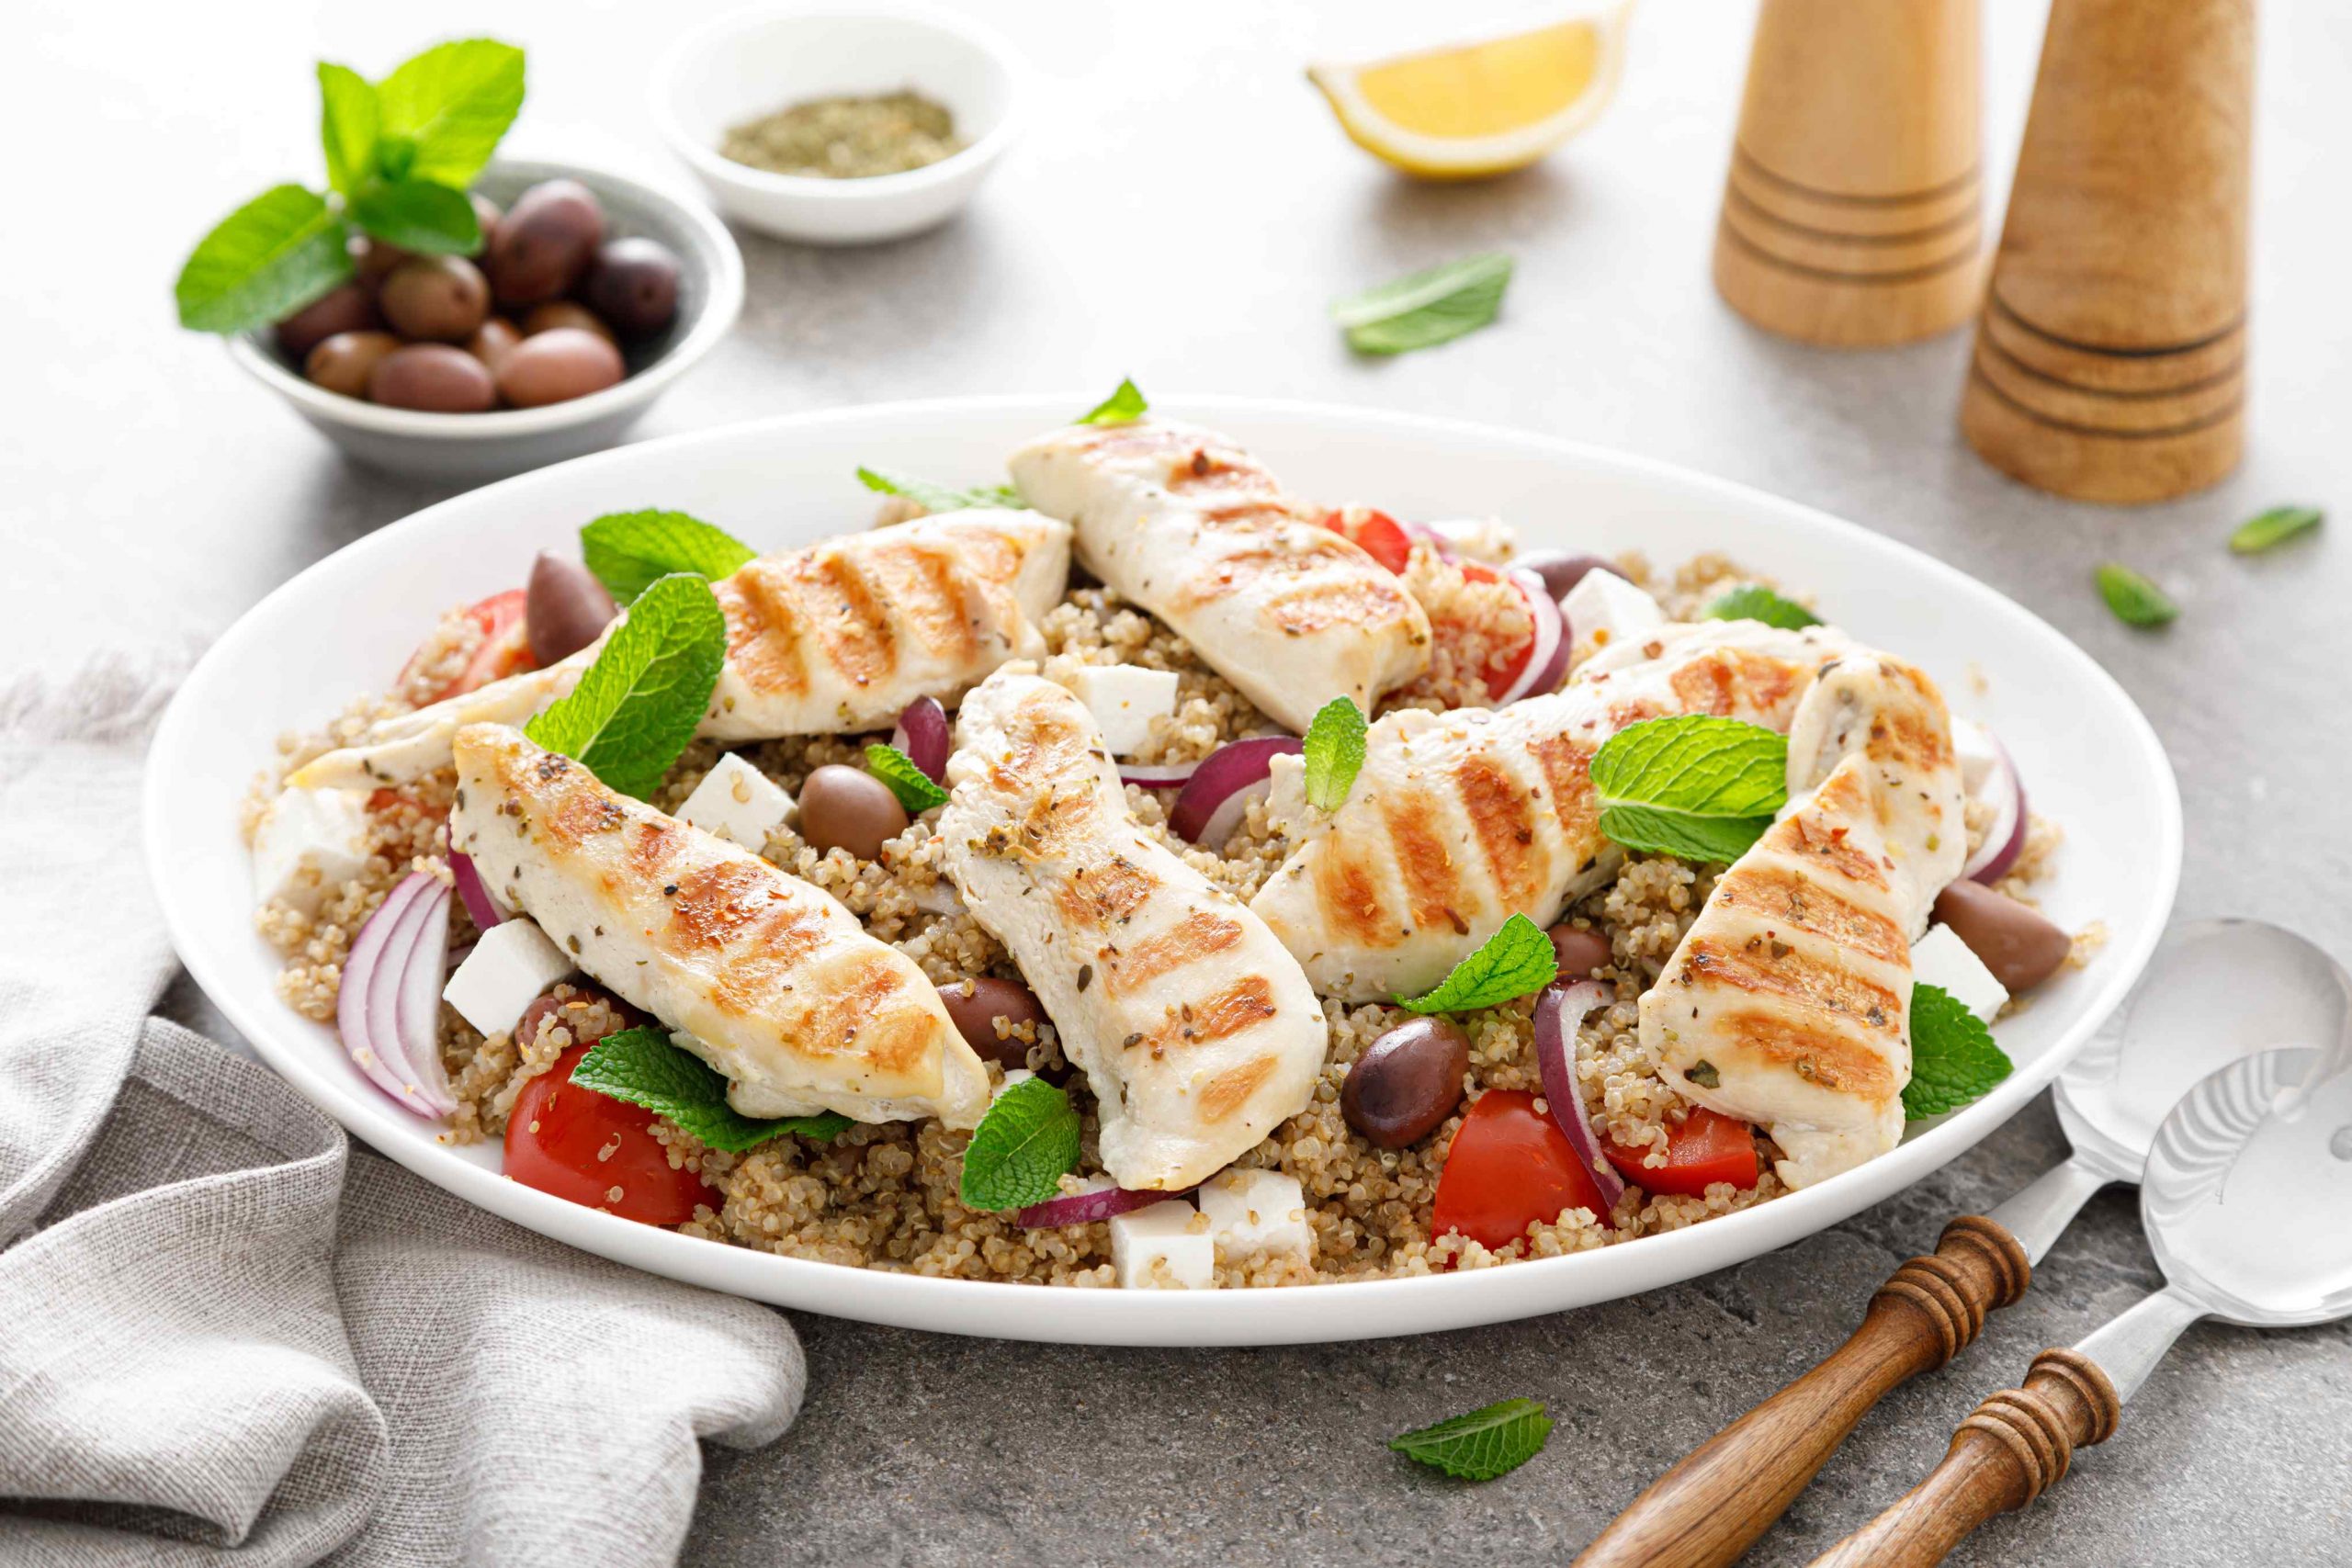 Grilled chicken breast and greek salad with quinoa